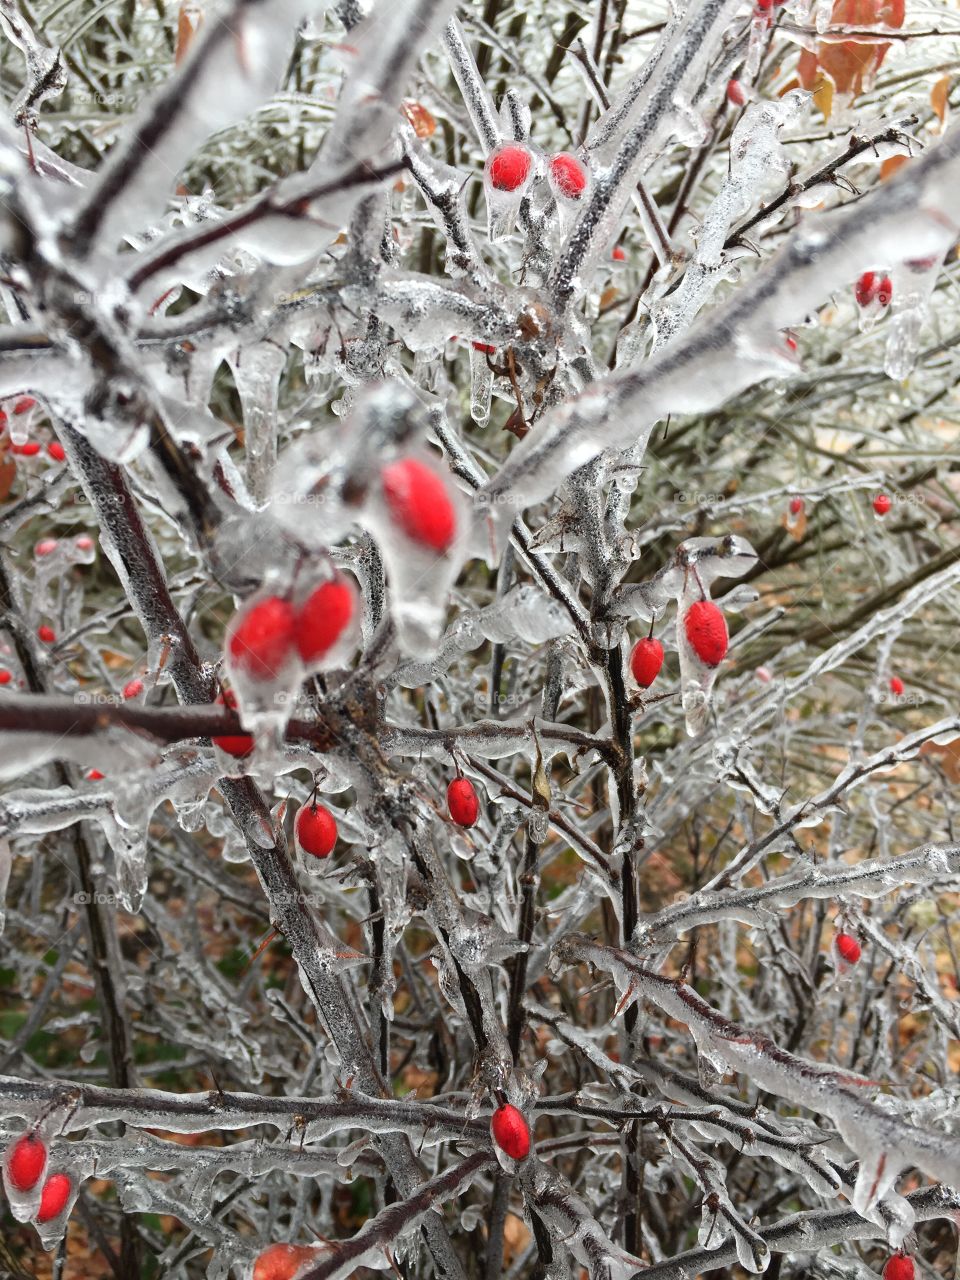 This is a picture taken in the winter when the ice had frozen on the branches.